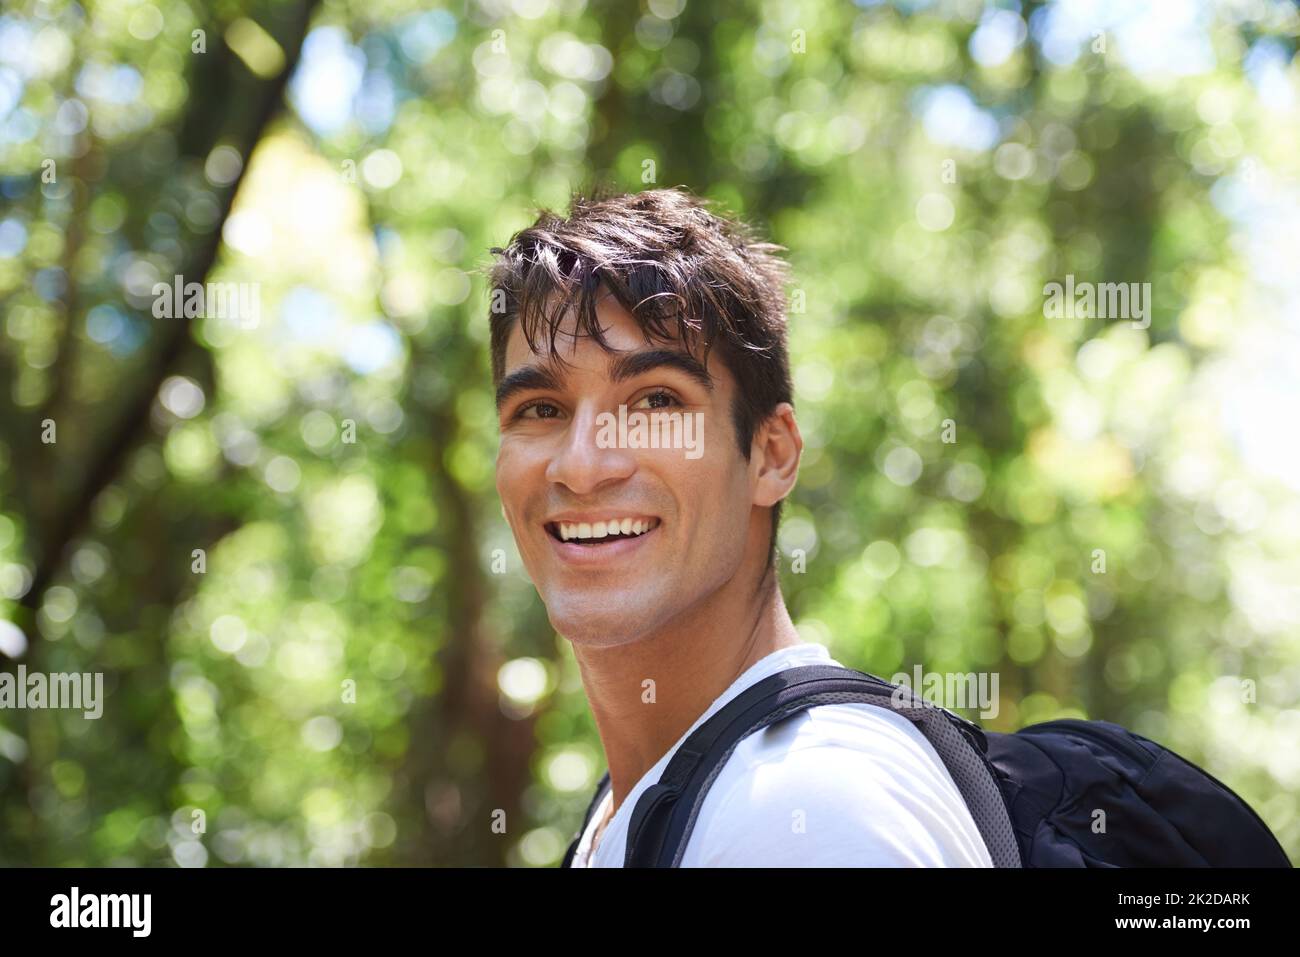 Surrounded by natures beauty. Shot of a handsome young man hiking in the forest. Stock Photo